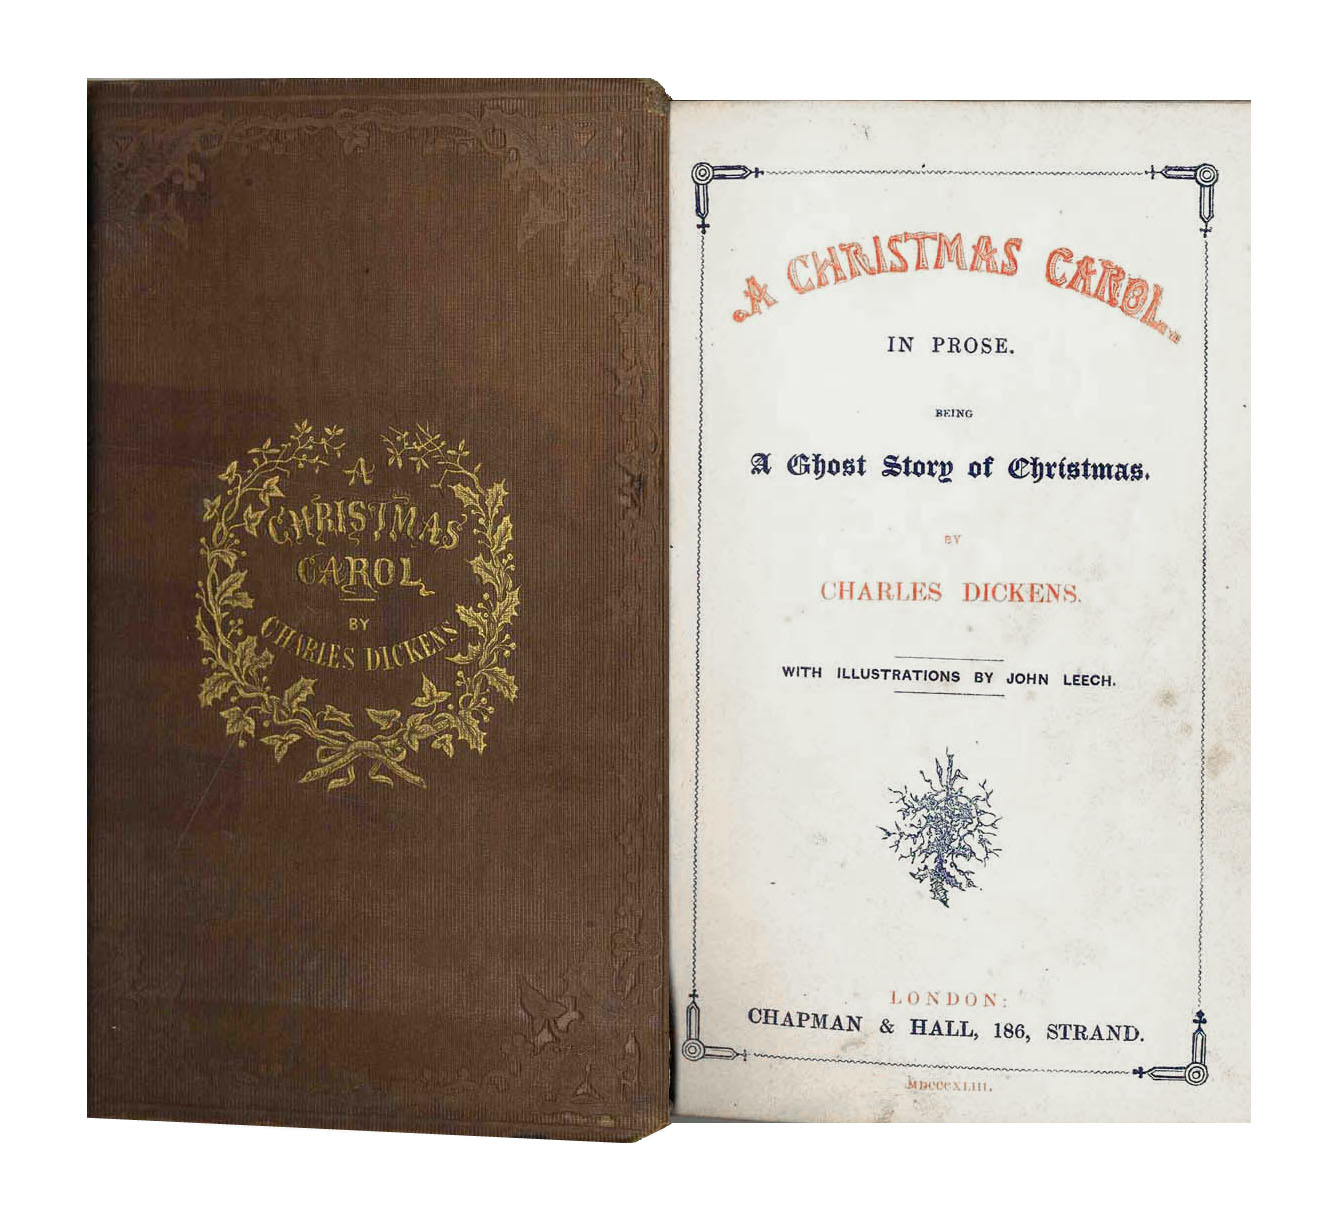 FREE APPRAISAL for Your Charles Dickens First Edition Book(s)